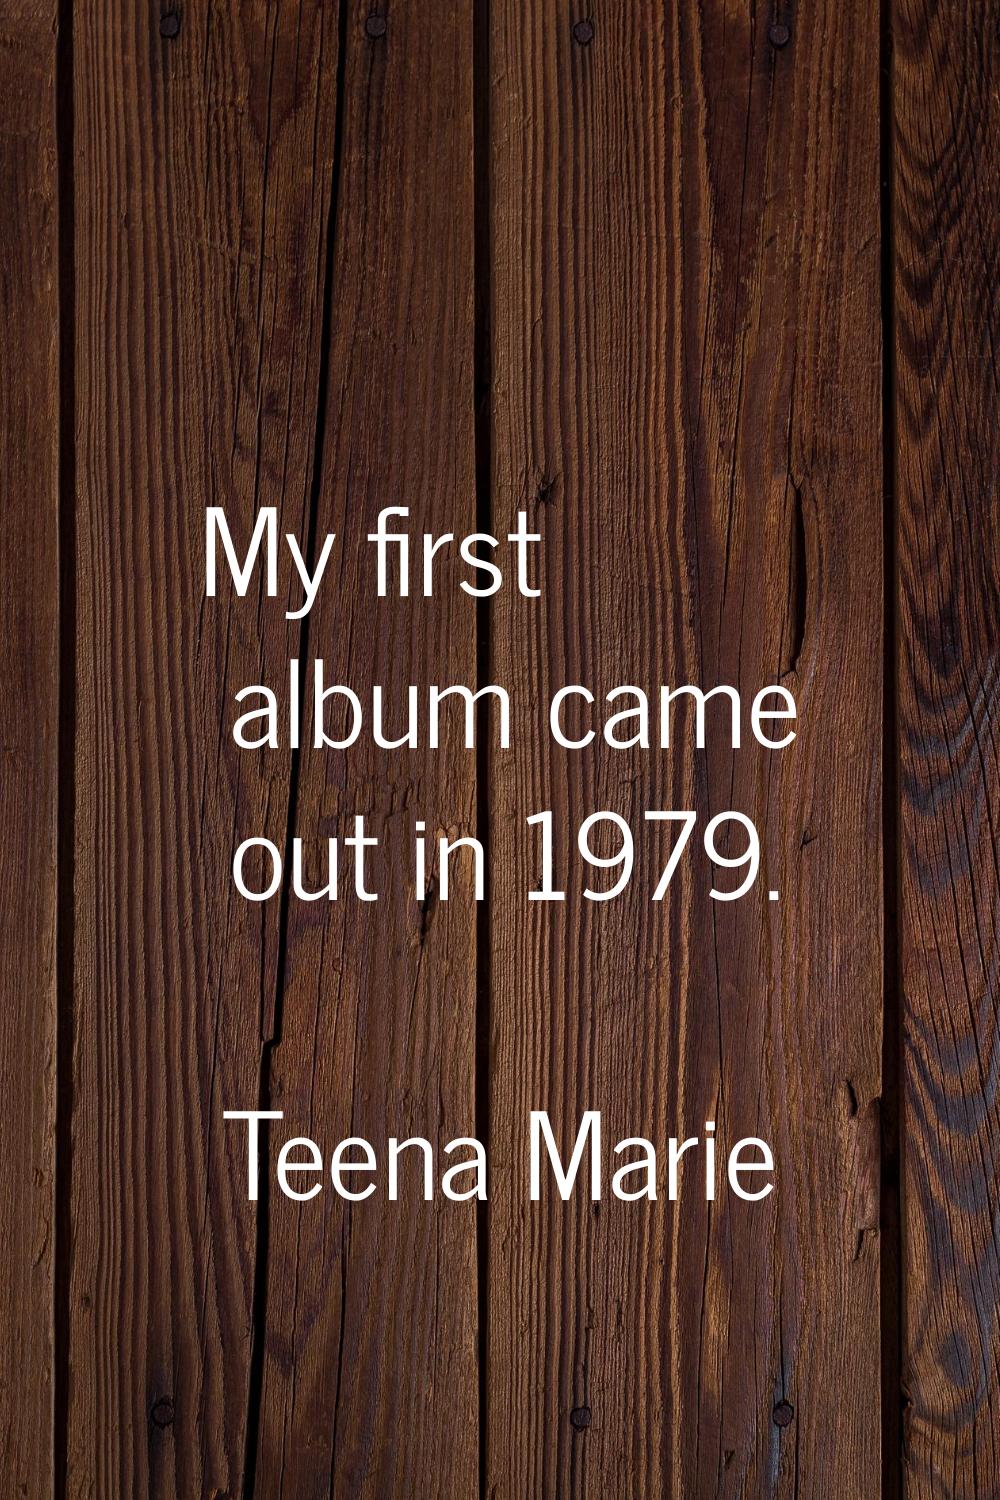 My first album came out in 1979.